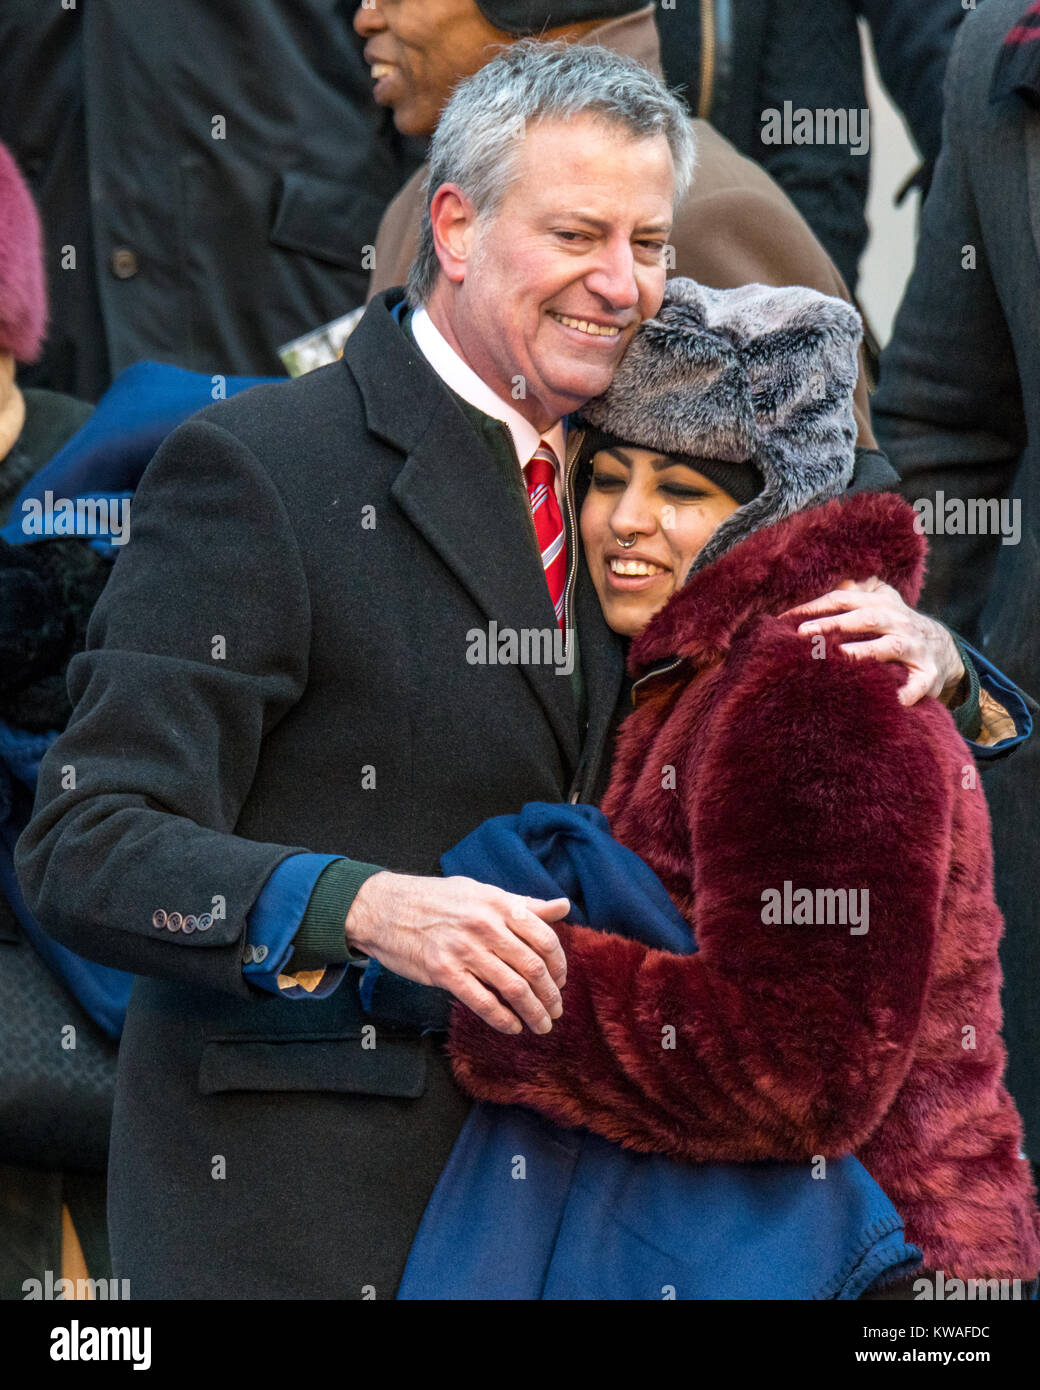 New York, USA. 1st Jan, 2018. New York City´s Mayor Bill de Blasio is congratulated by his daughter Chiara after taking the oath of office. De Blasio started his second term as Mayor of USA's largest city with an outdoors inauguration ceremony at City Hall under freezing temperatures on January 1st, 2018. Credit: Enrique Shore/Alamy Live News Stock Photo